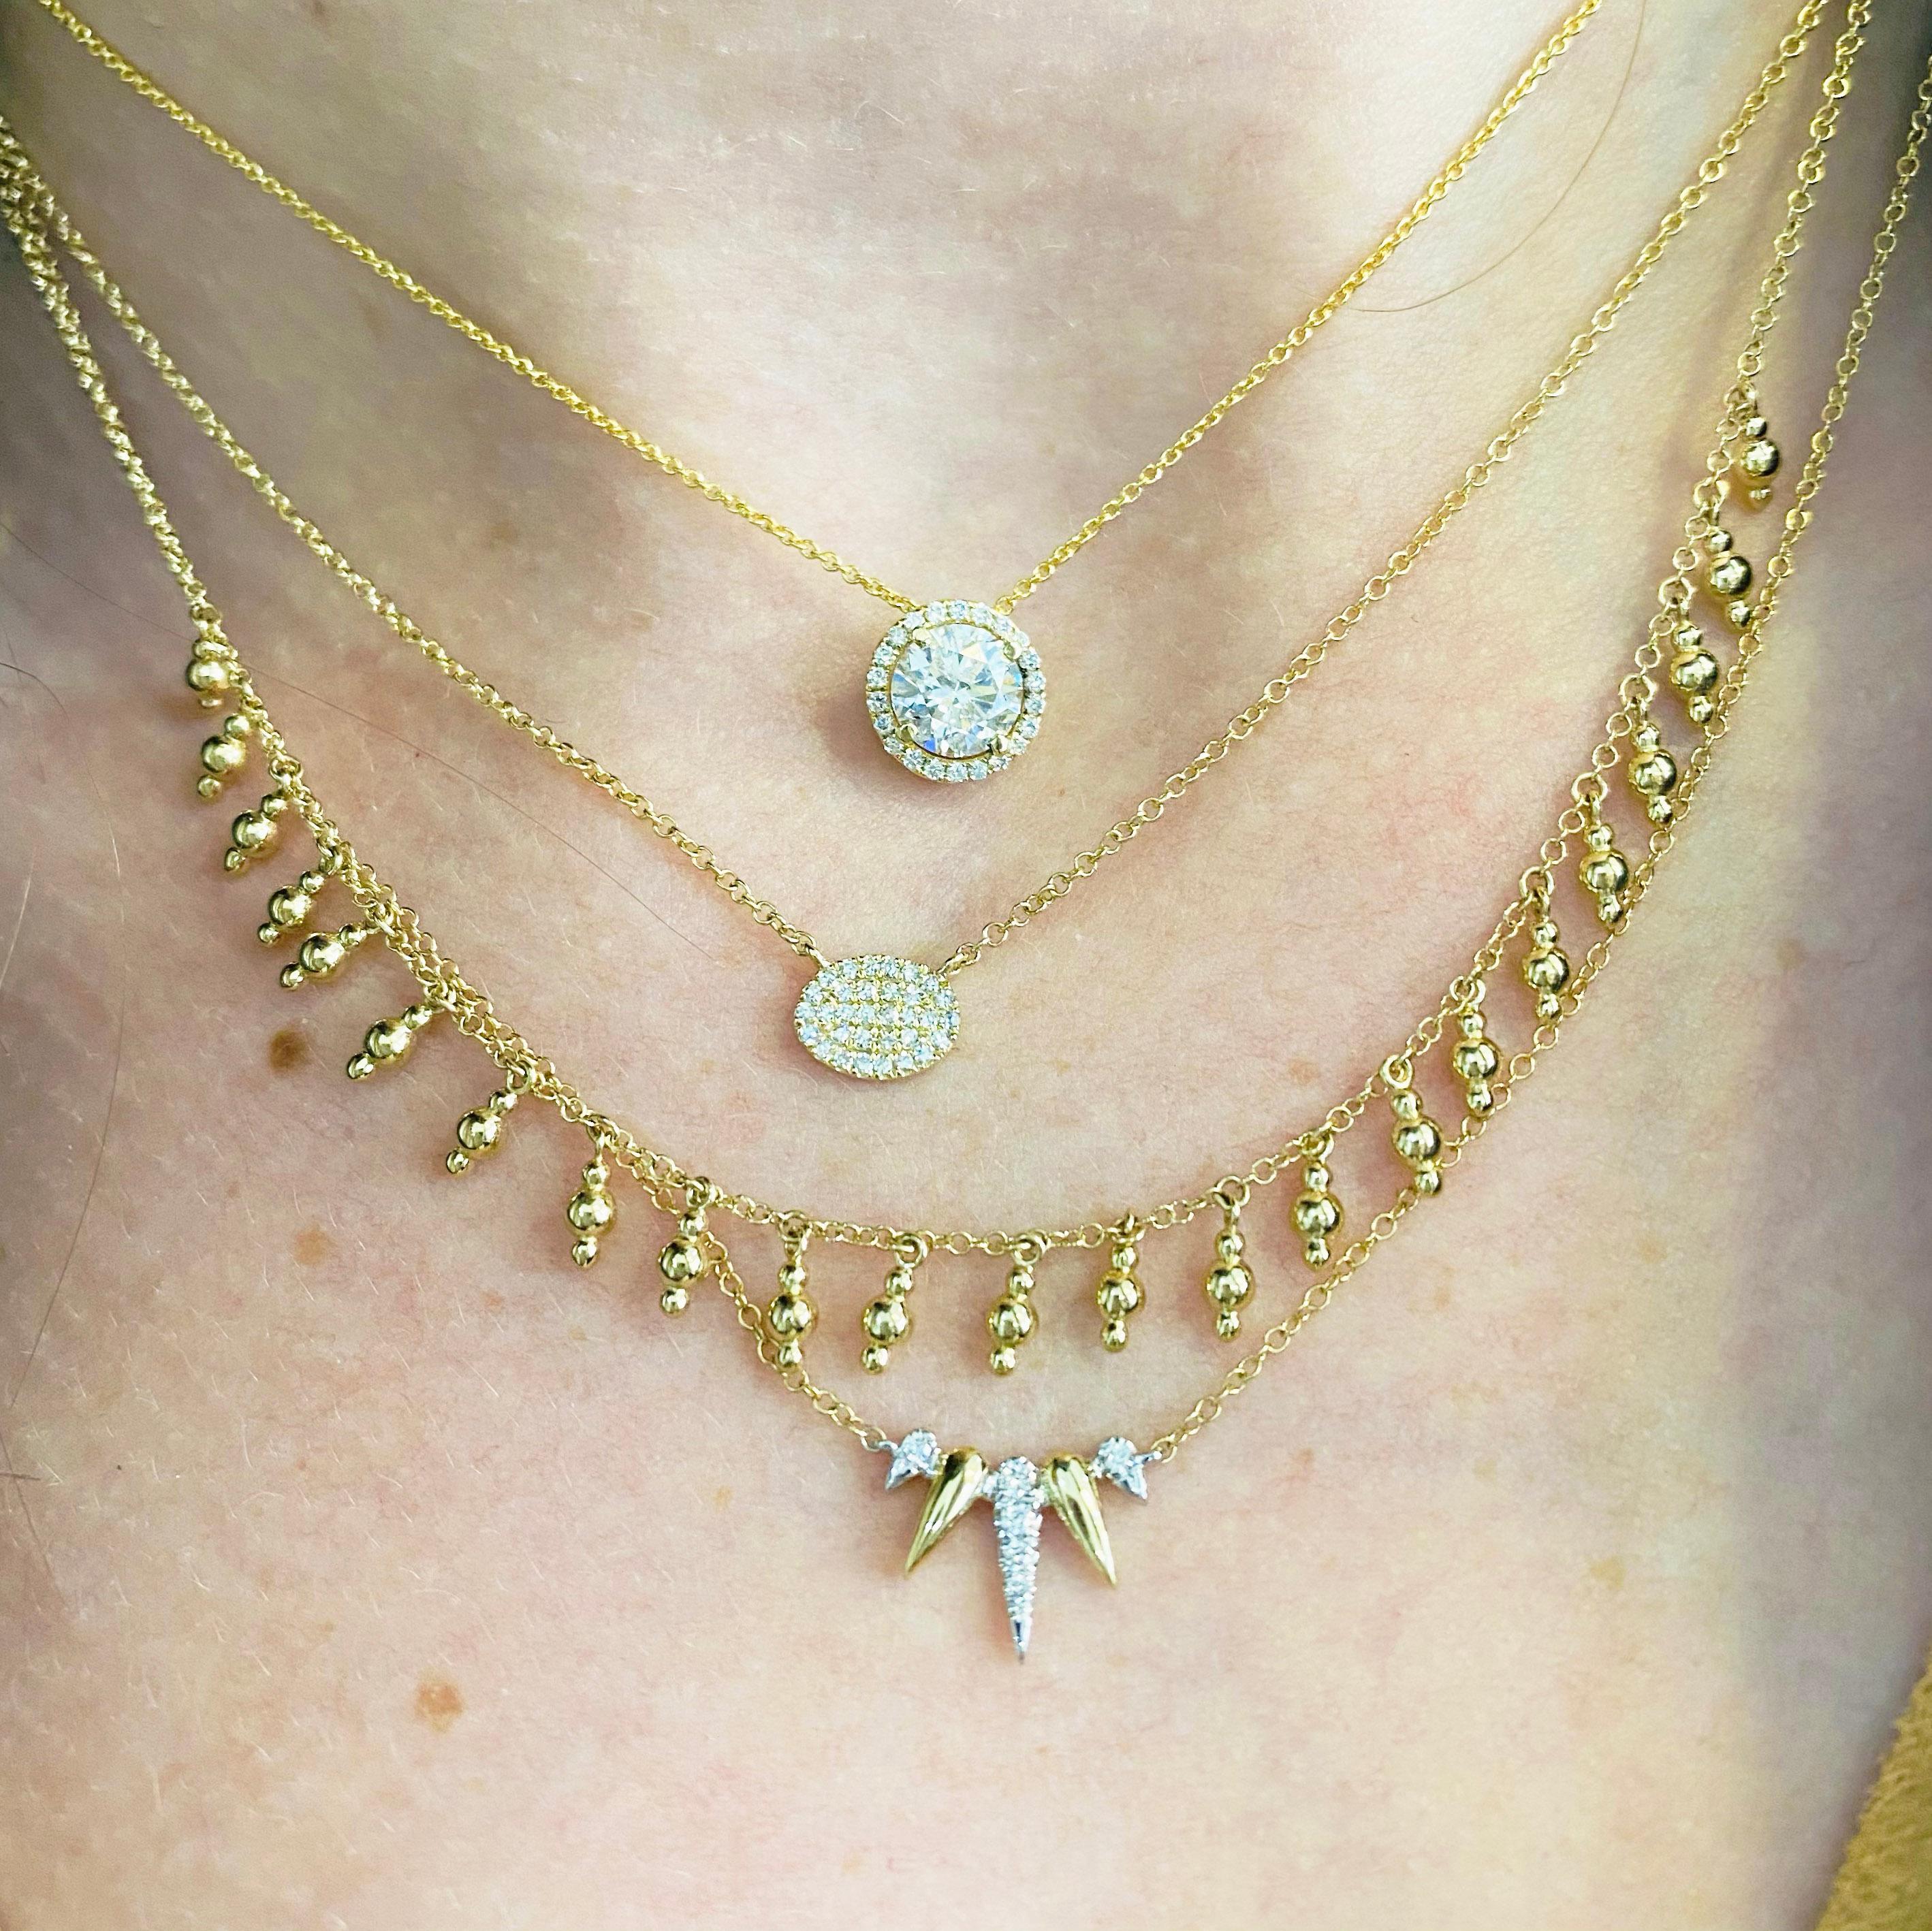 This gorgeous 14k yellow and white gold spike fan necklace dripping with brilliant diamonds is sure to put a smile on anyone's face! This necklace looks beautiful worn by itself and also looks wonderful in a necklace stack. This necklace would make